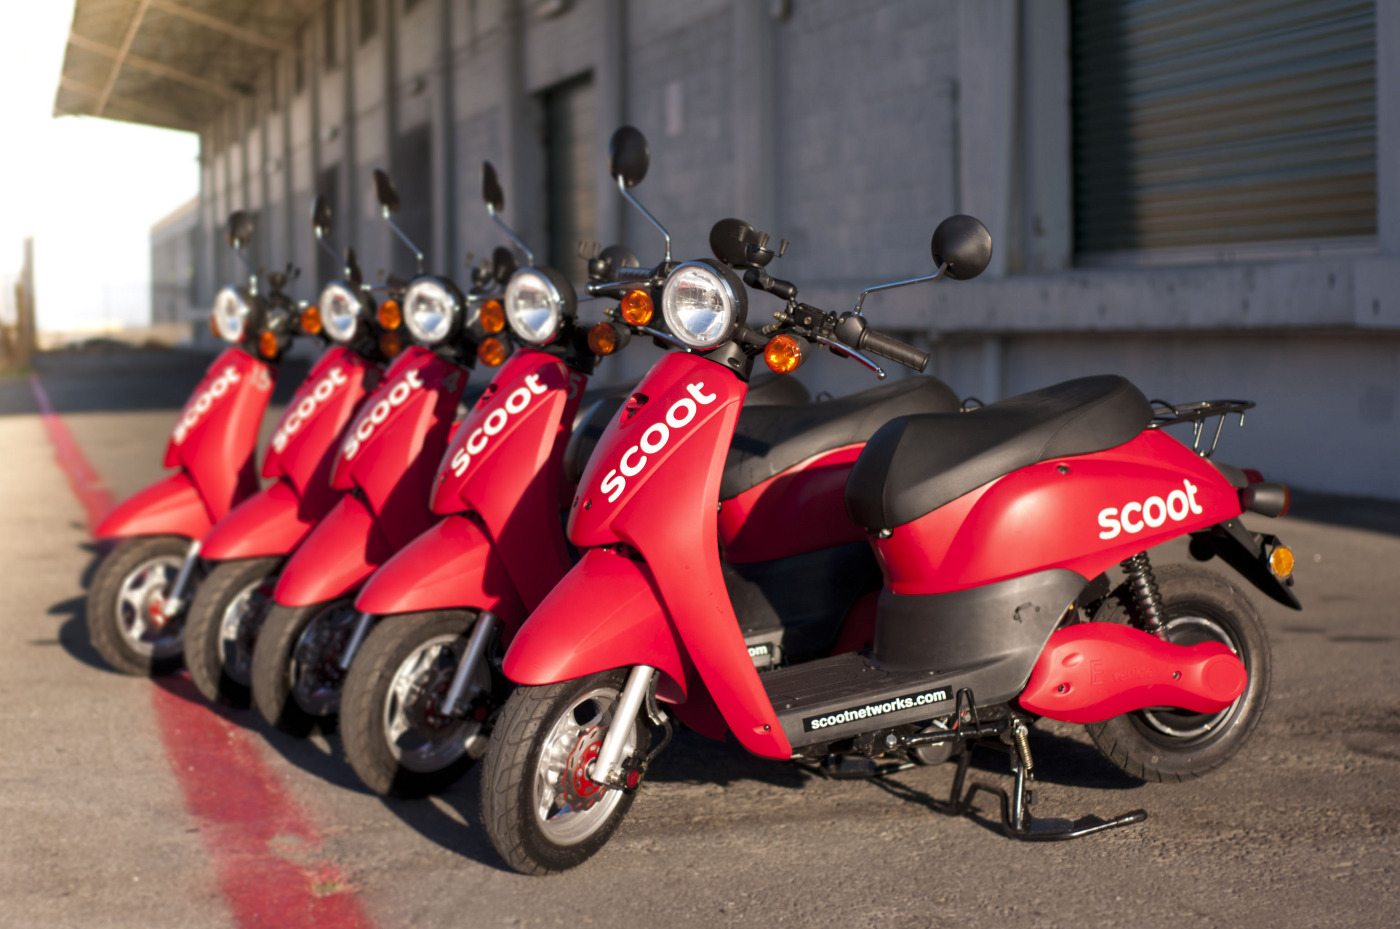 For Scooters” Startup Scoot Networks Launches To Public San Francisco | TechCrunch